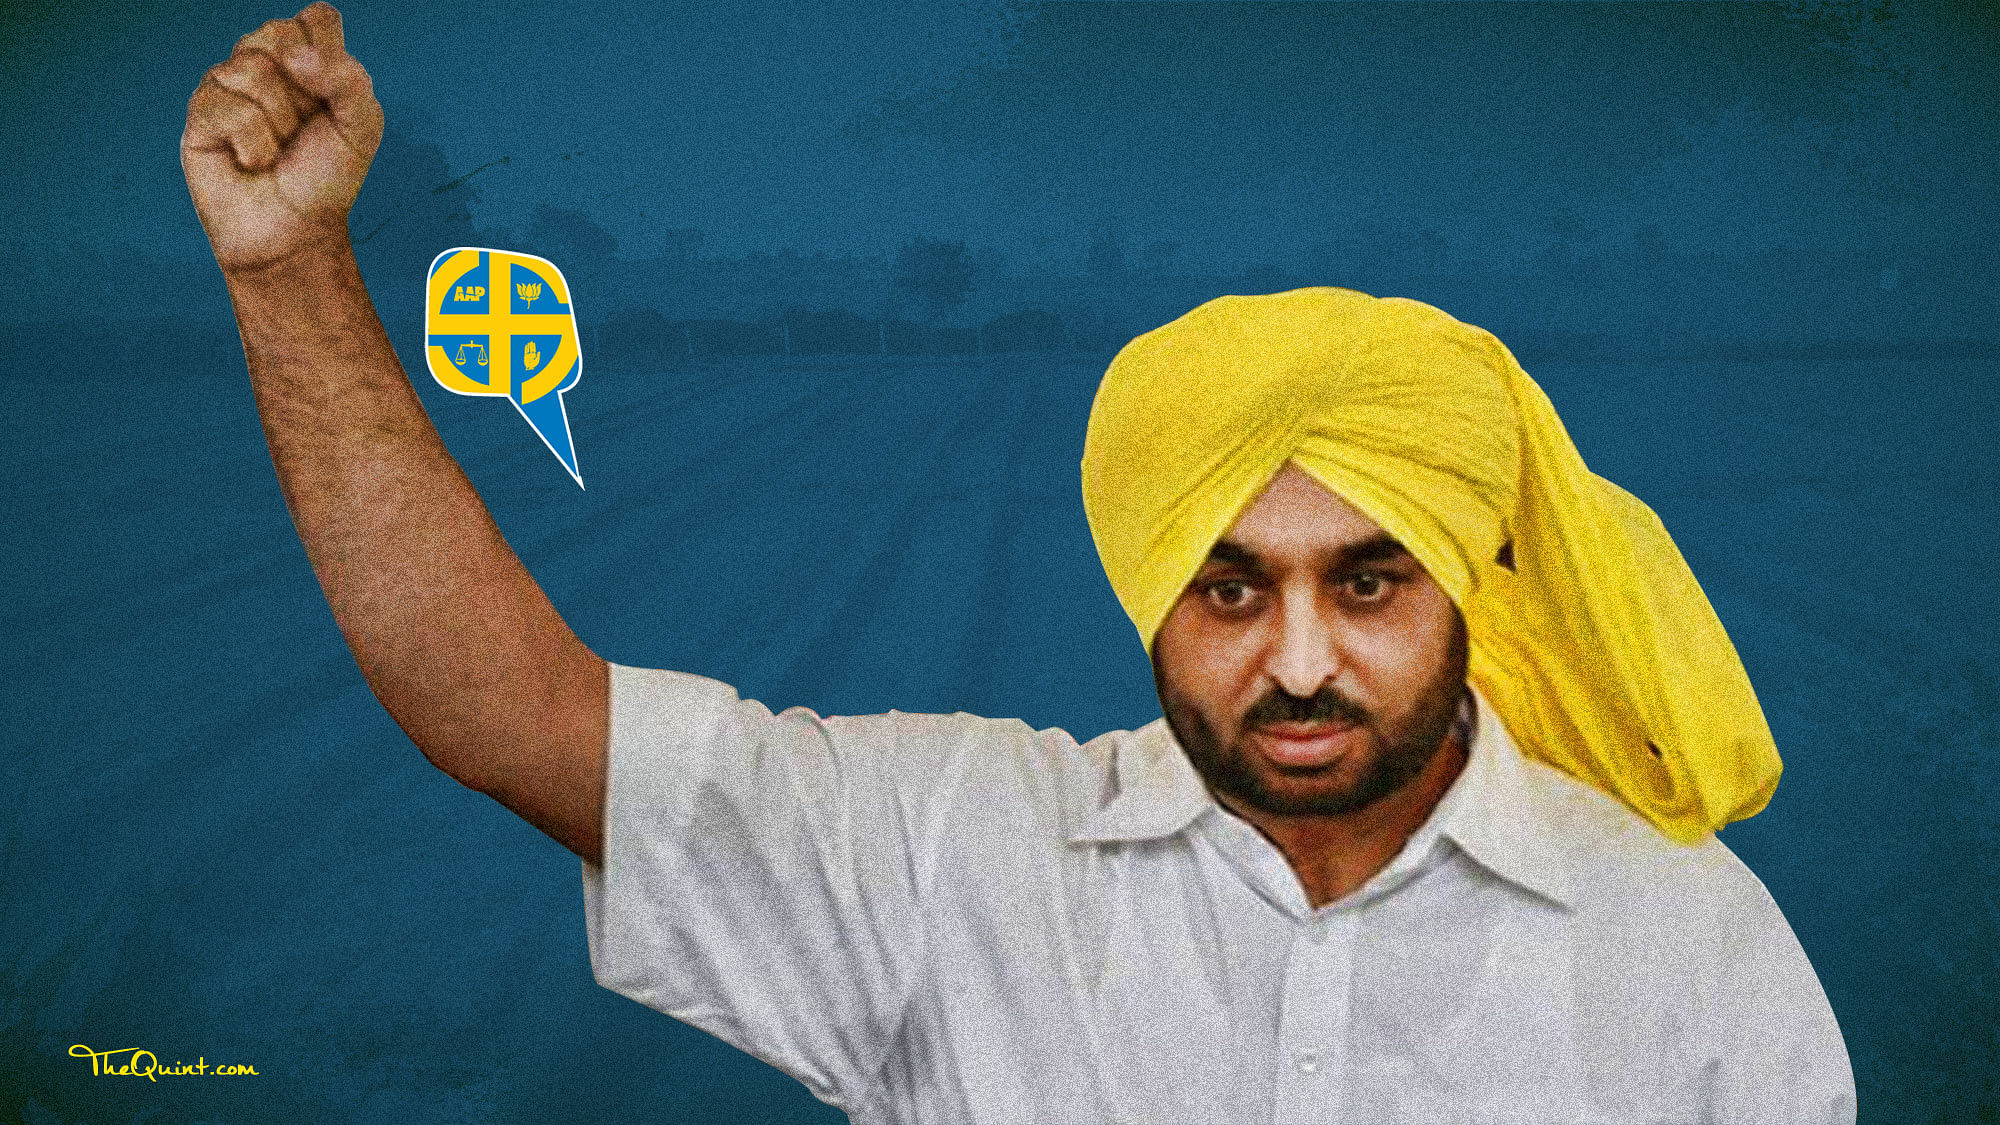 Bhagwant Mann is touted by many as the CM candidate for AAP in the Punjab elections (Photo: <b>The Quint</b>)